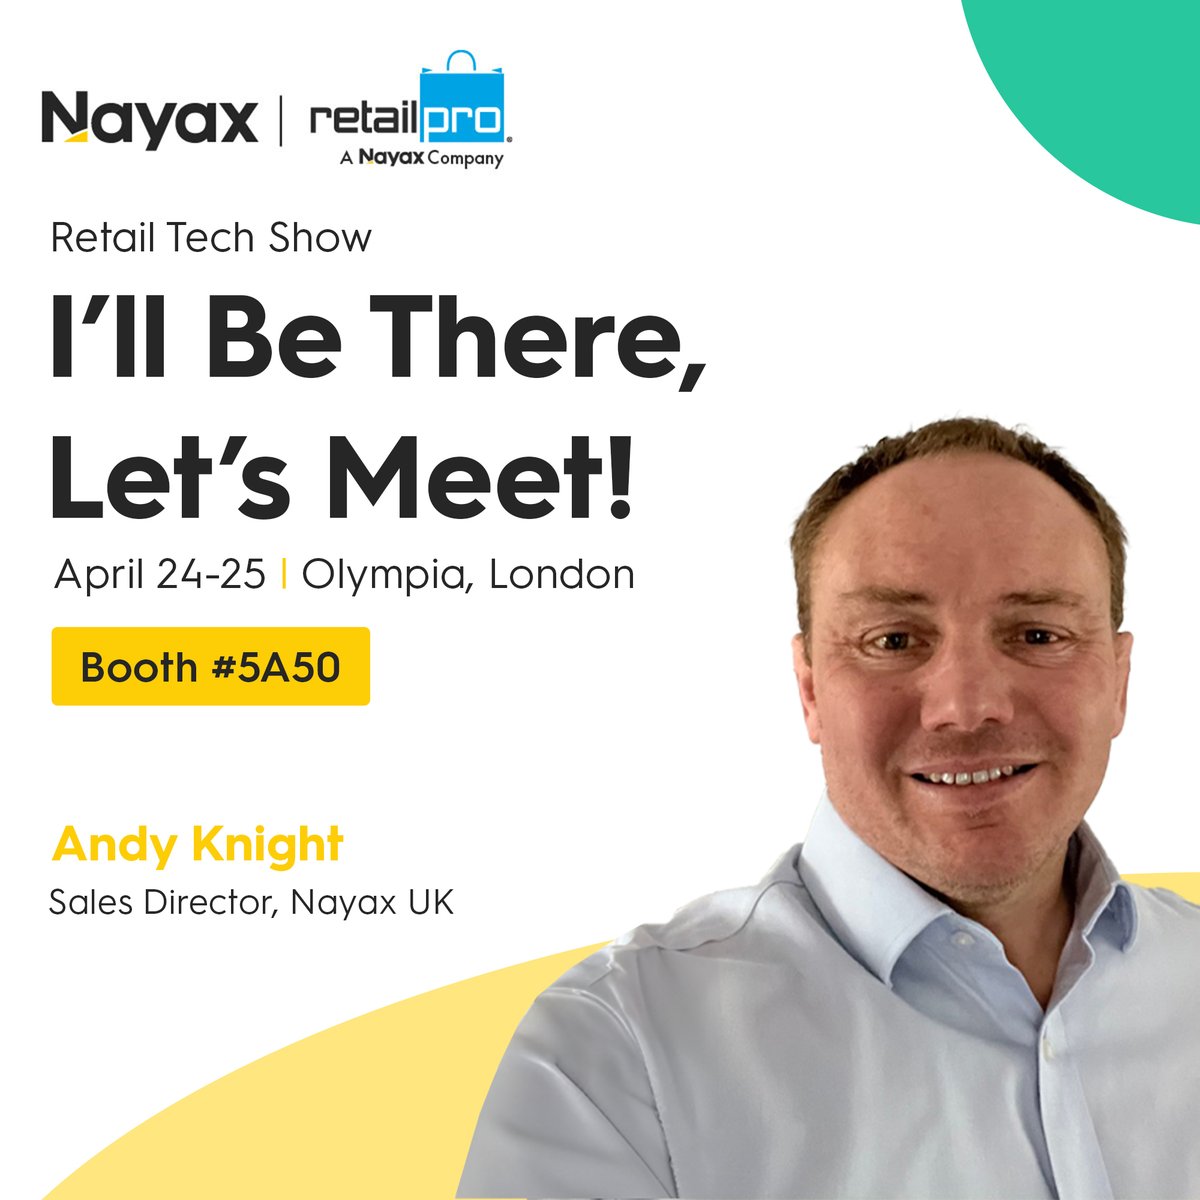 Andy Knight, Nayax's UK Sales Director, will be at the @RetailTechShow ! 
Schedule a meeting to explore how our complete solutions can expand your horizons and help your business grow >> hubs.li/Q02thht10
___
#Nayax # #RTS2024 #RetailTech #Retailtechnology